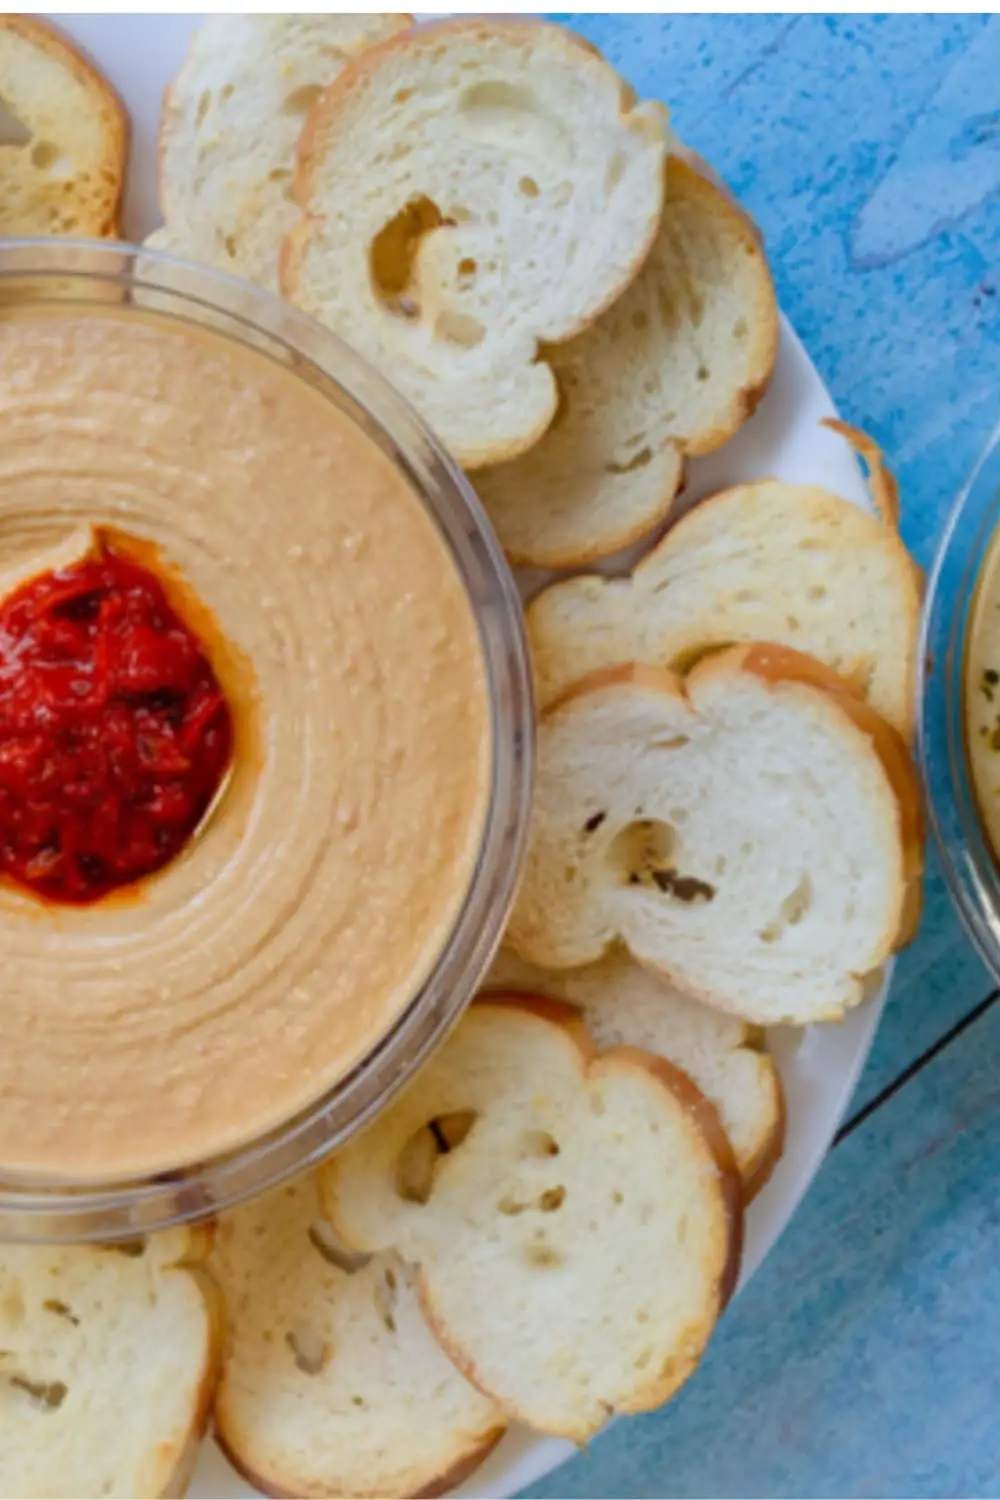 Everyday Snacking Made Easy With Sabra® Hummus From Publix